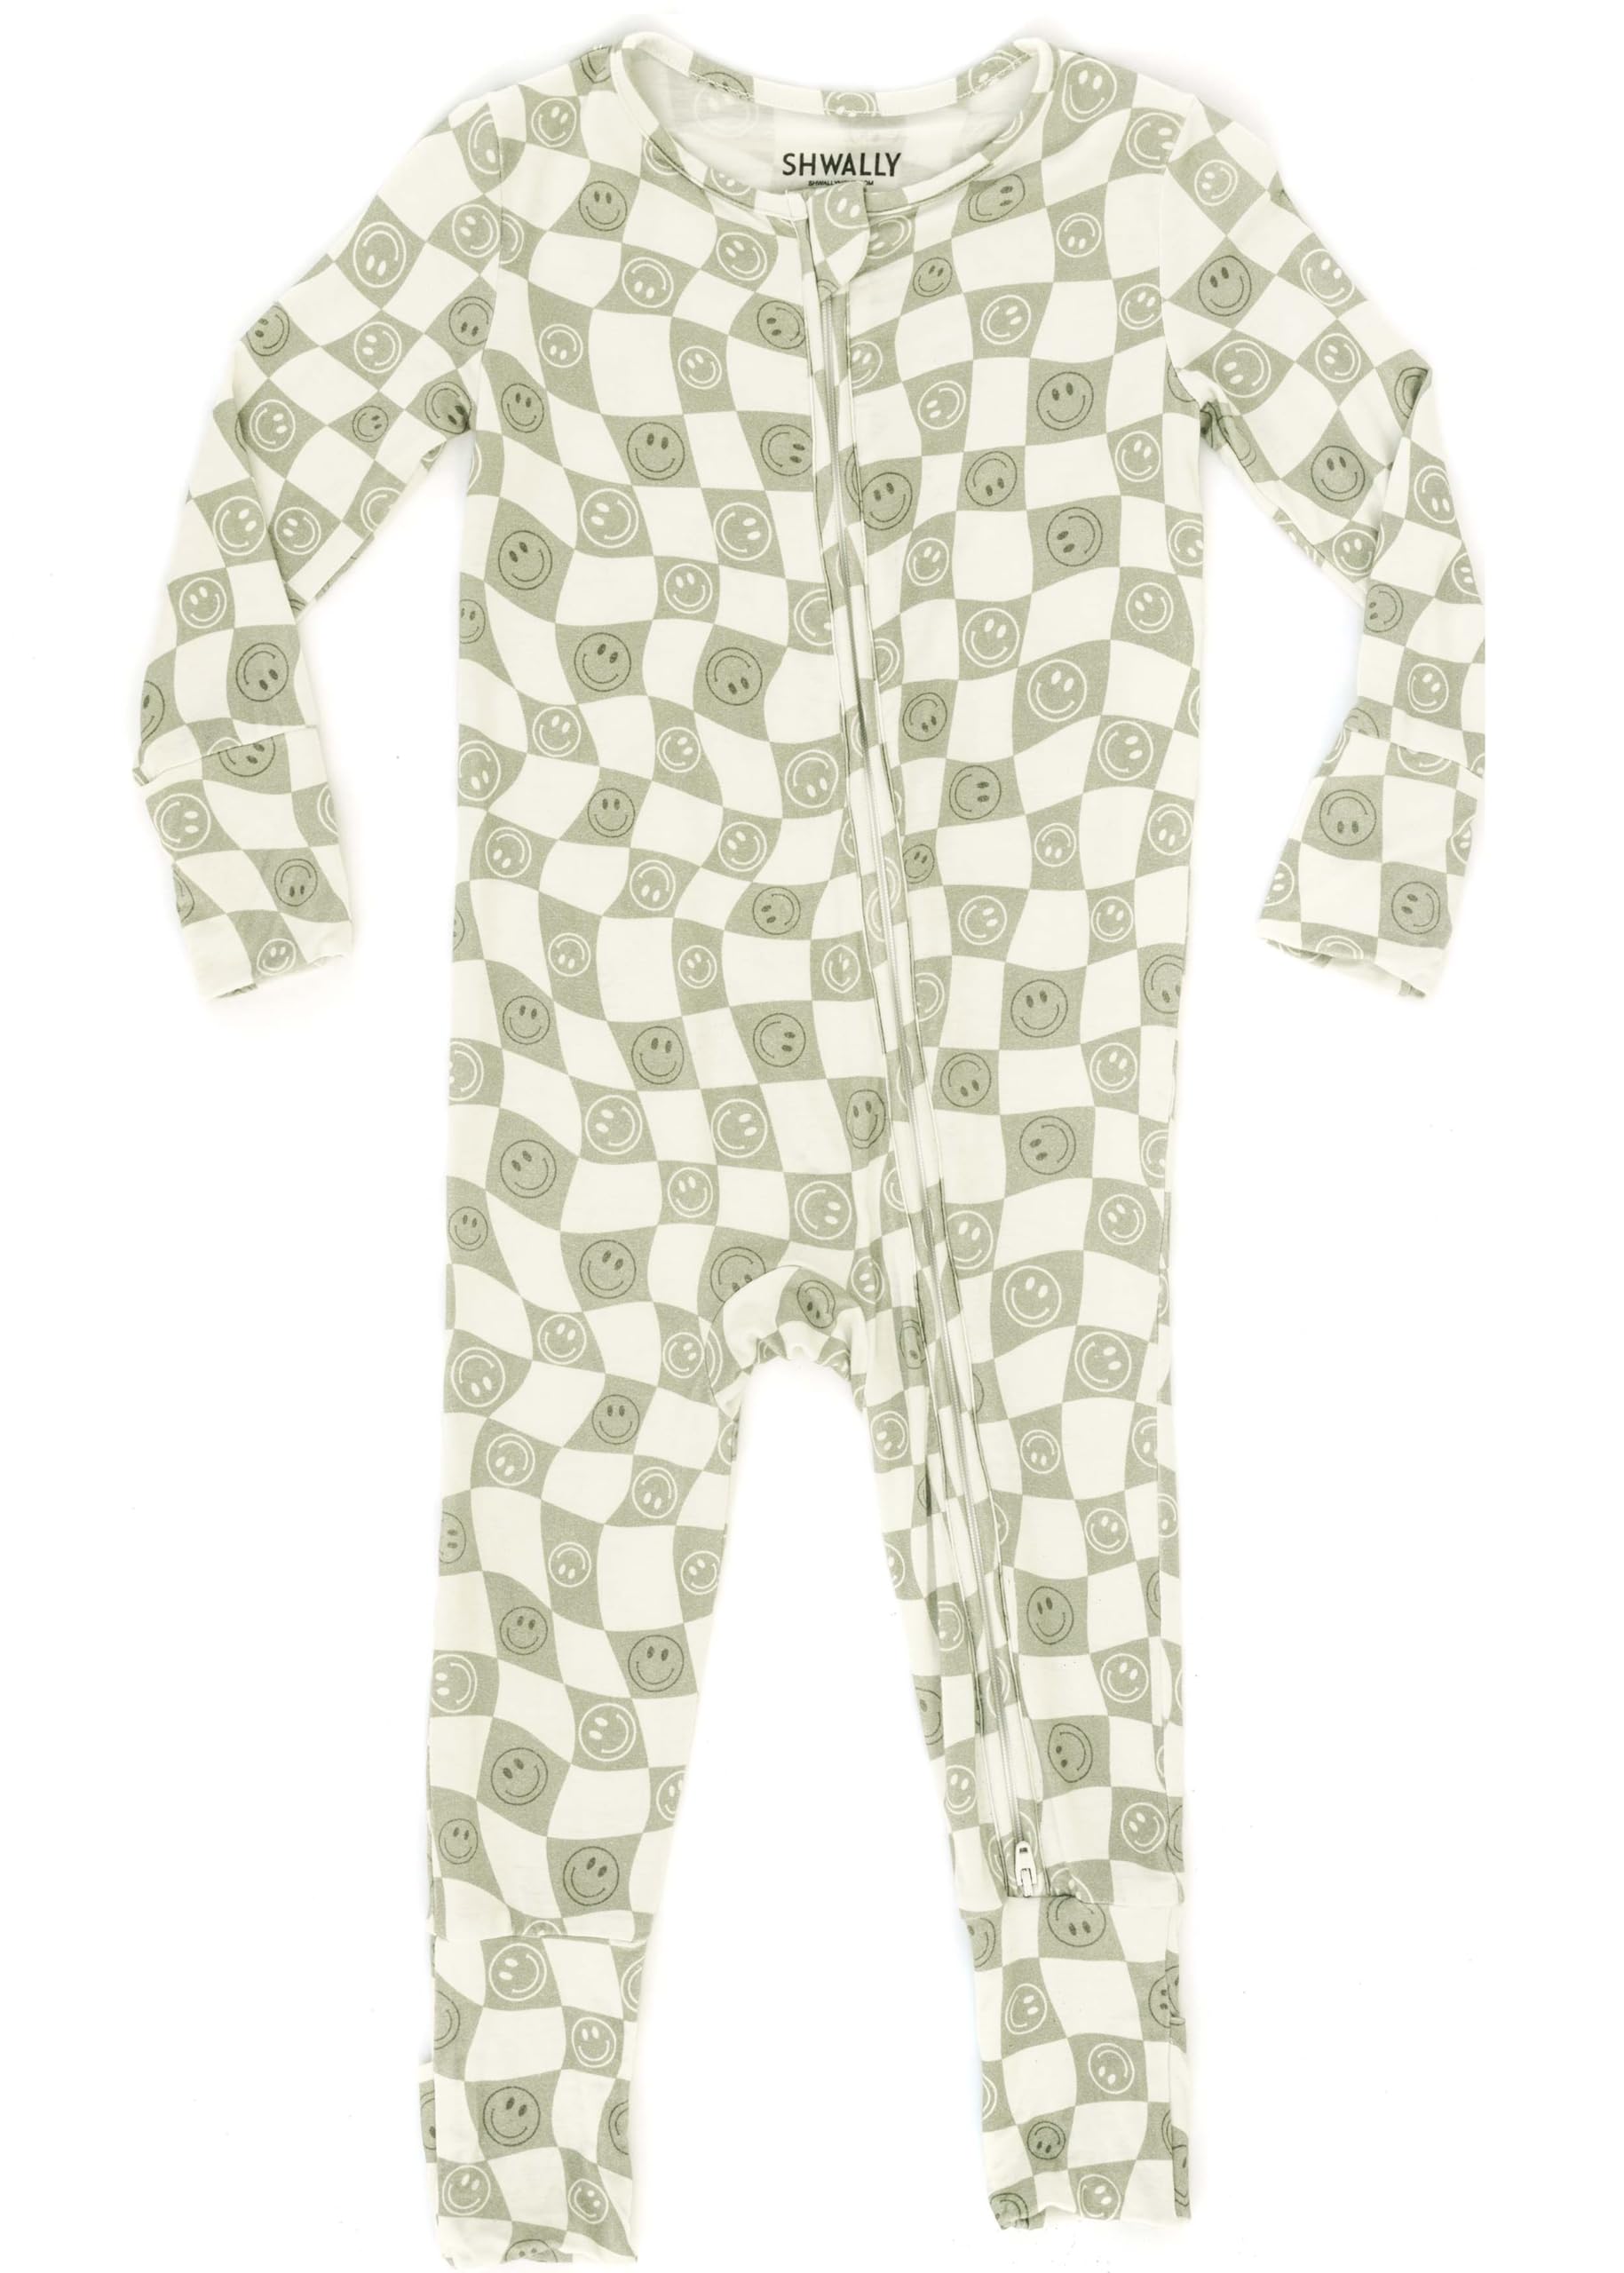 Shwally Organic Baby Bamboo Rompers with 11 Signature Prints - Infant Zipper Jumpsuits